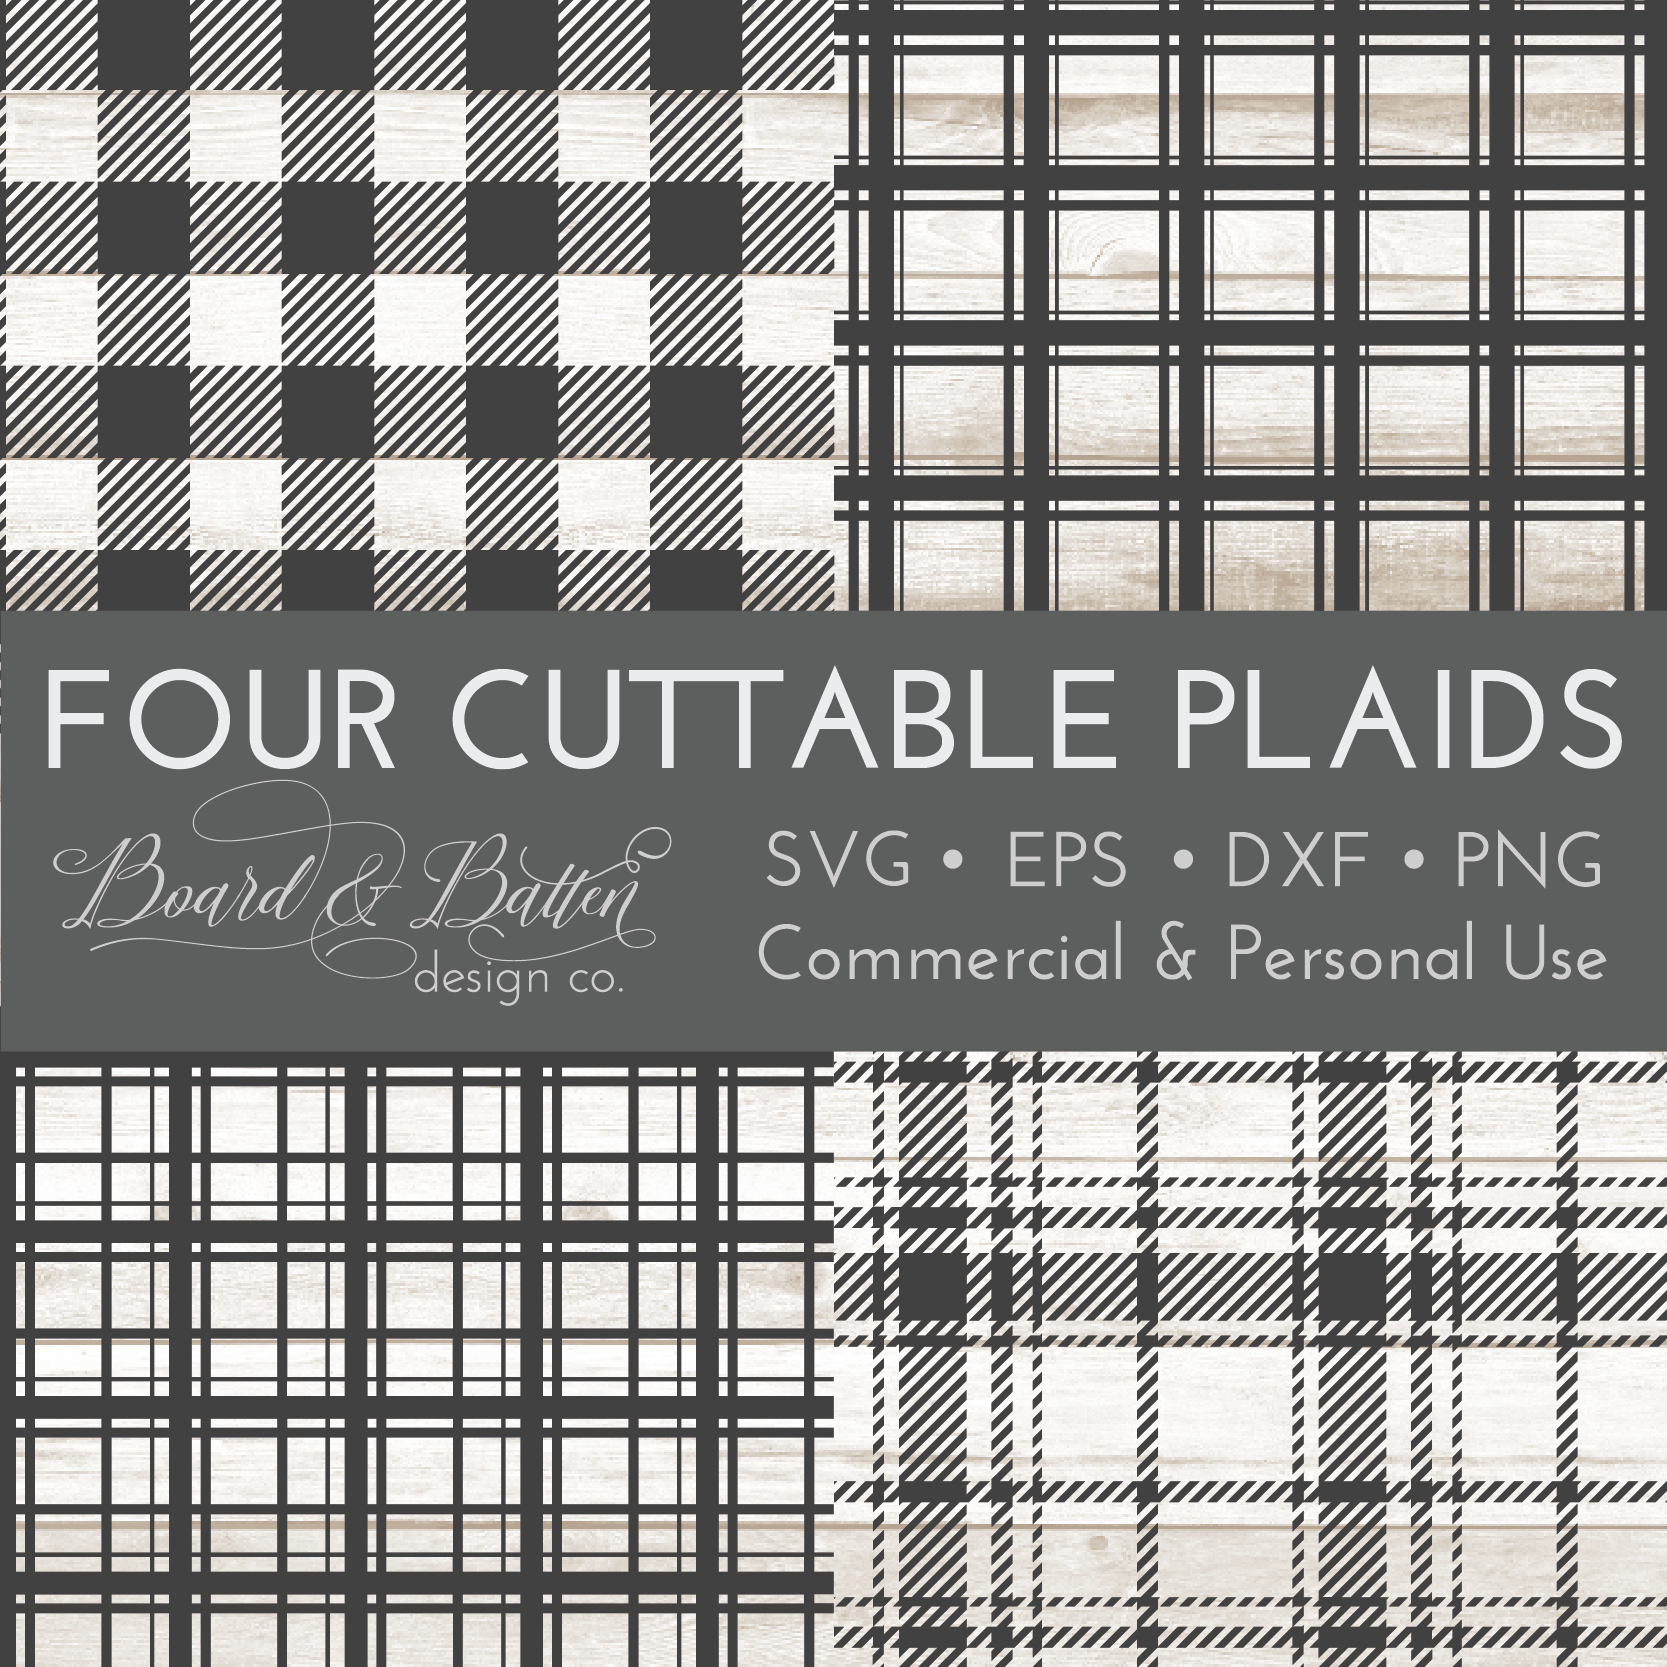 Set of 4 Cuttable Plaid SVG Files (Including Buffalo Check) - Commercial Use SVG Files for Cricut & Silhouette